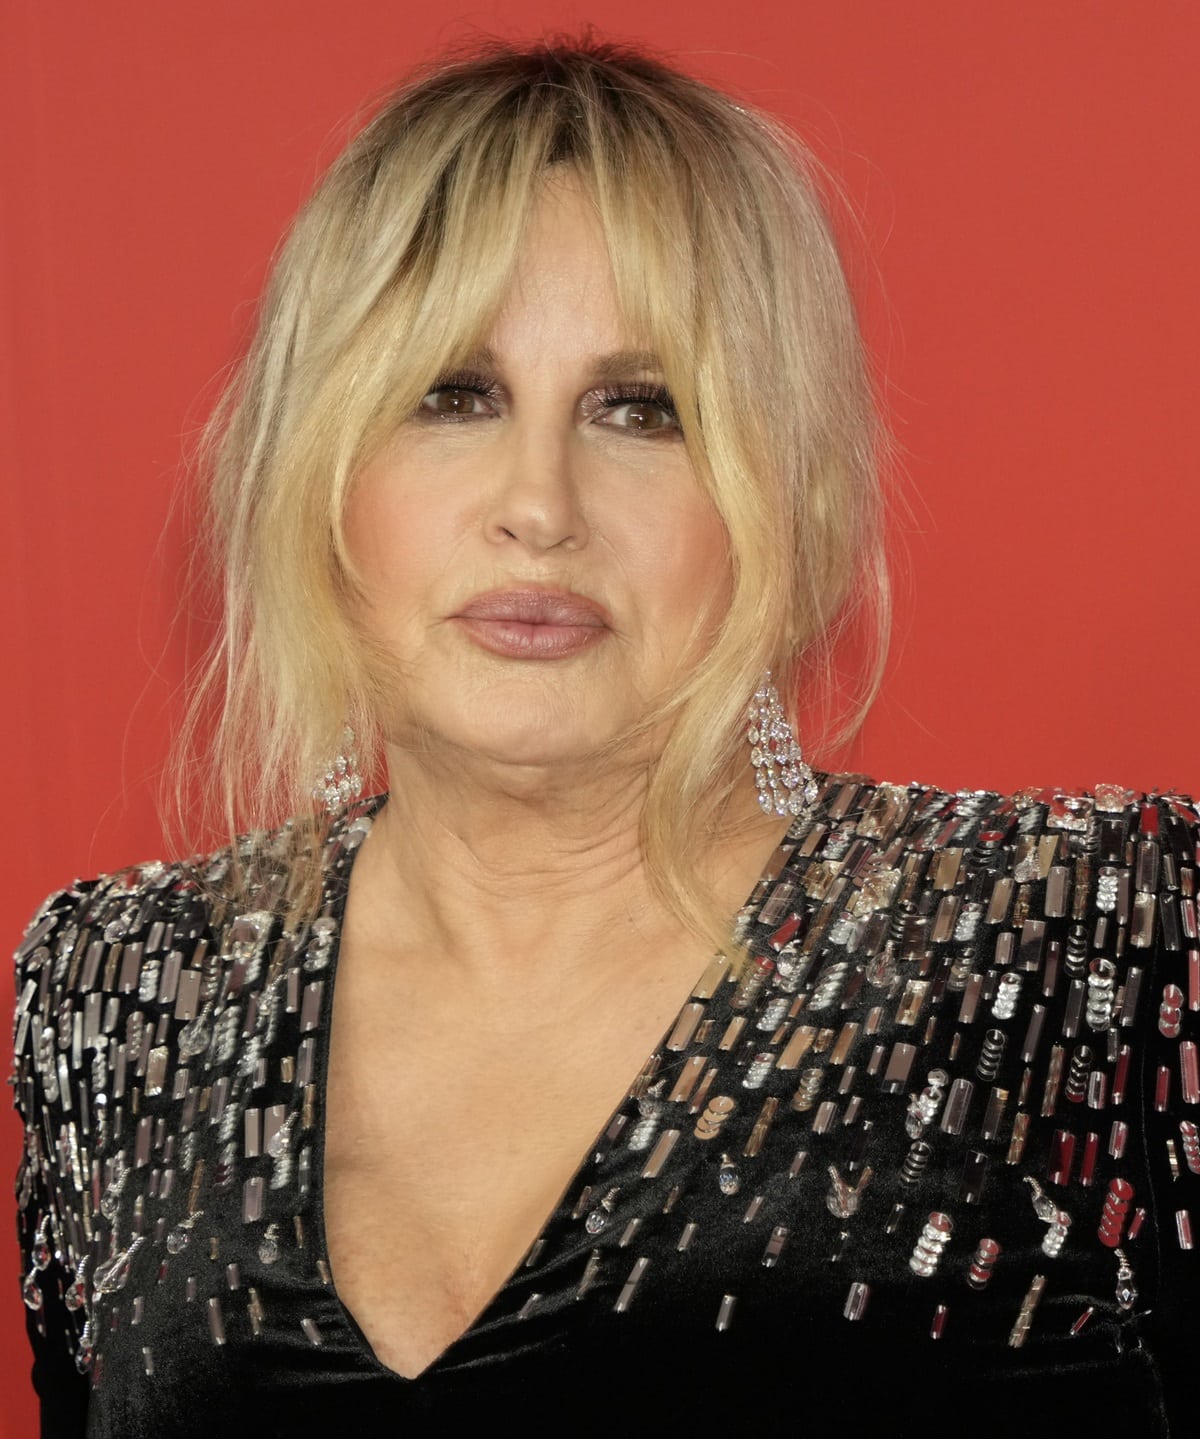 Jennifer Coolidge styled her sparkling dress with diamond chandelier earrings by Wempe and wore her hair in a loose updo with curtain bangs, accentuating her facial features